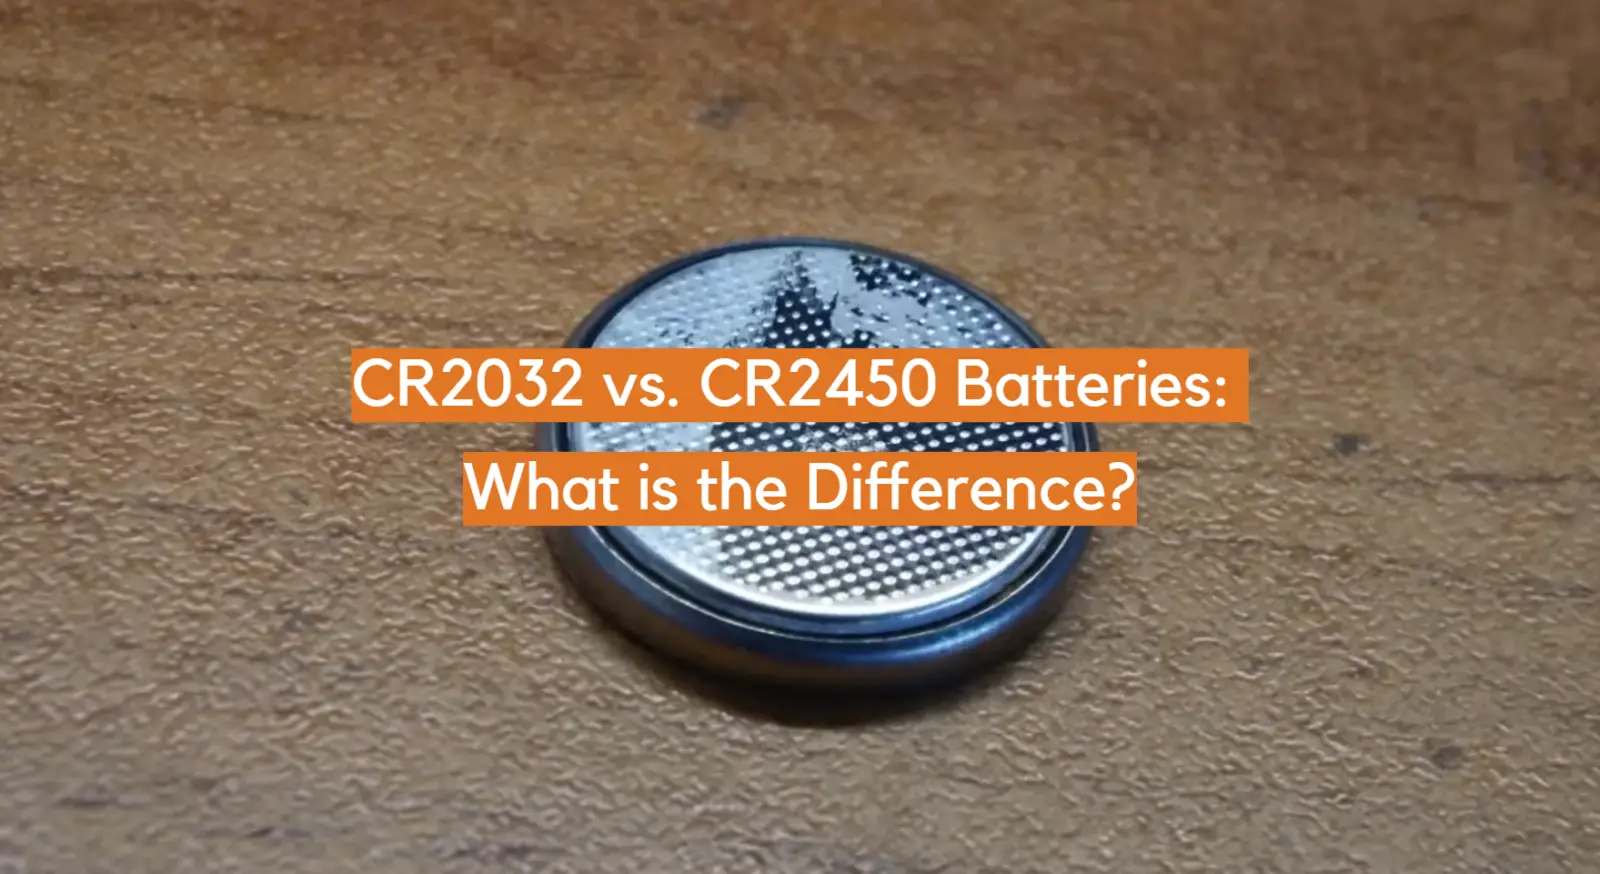 CR2032 vs. CR2450 Batteries: What is the Difference?